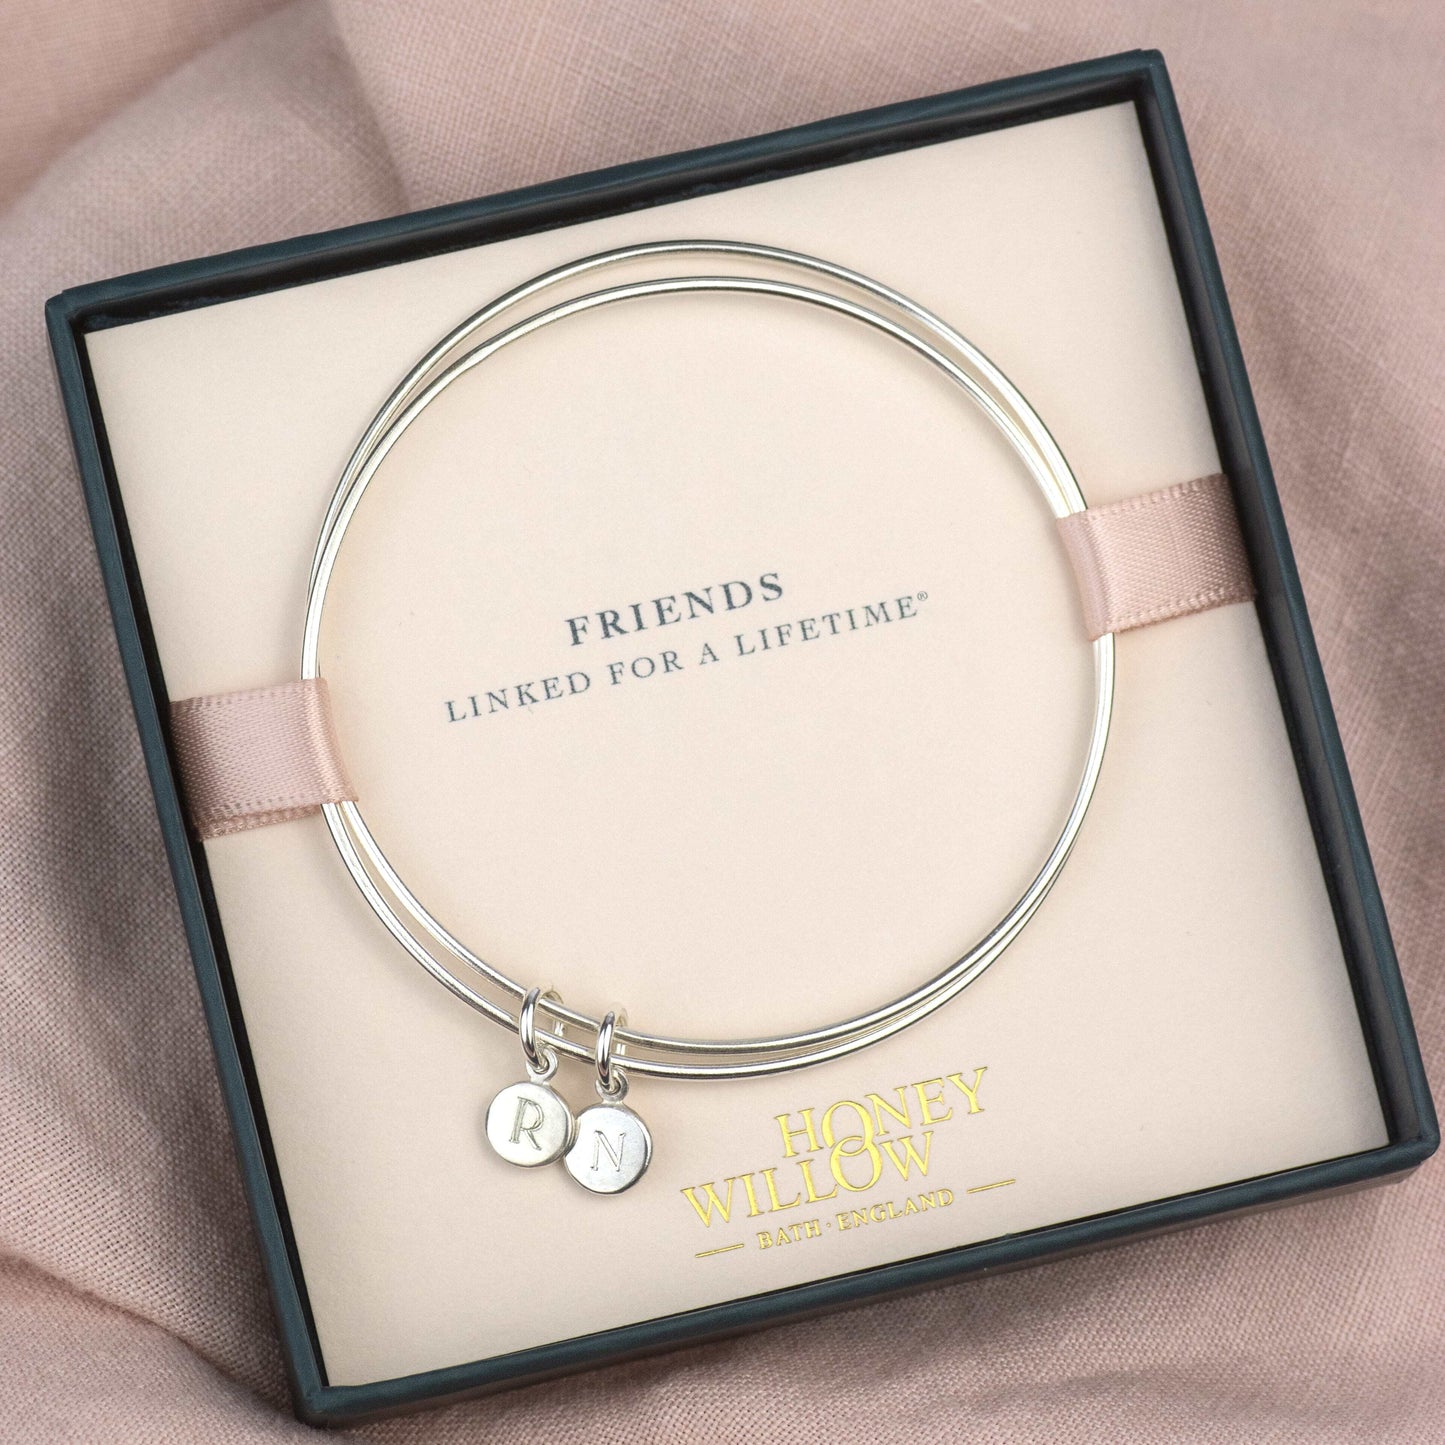 Personalised Friendship Bracelet - Double Linked Bangle - Linked for a Lifetime